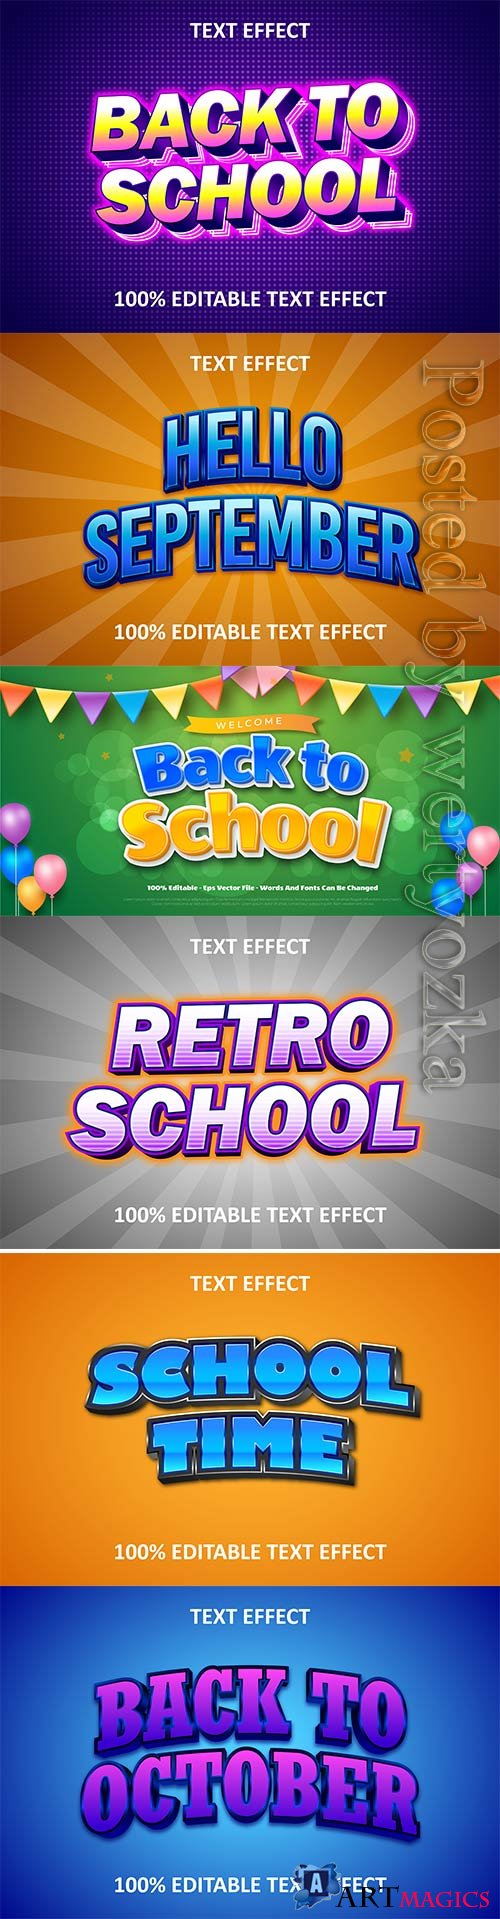 Back to school 3d editable text style effect vector